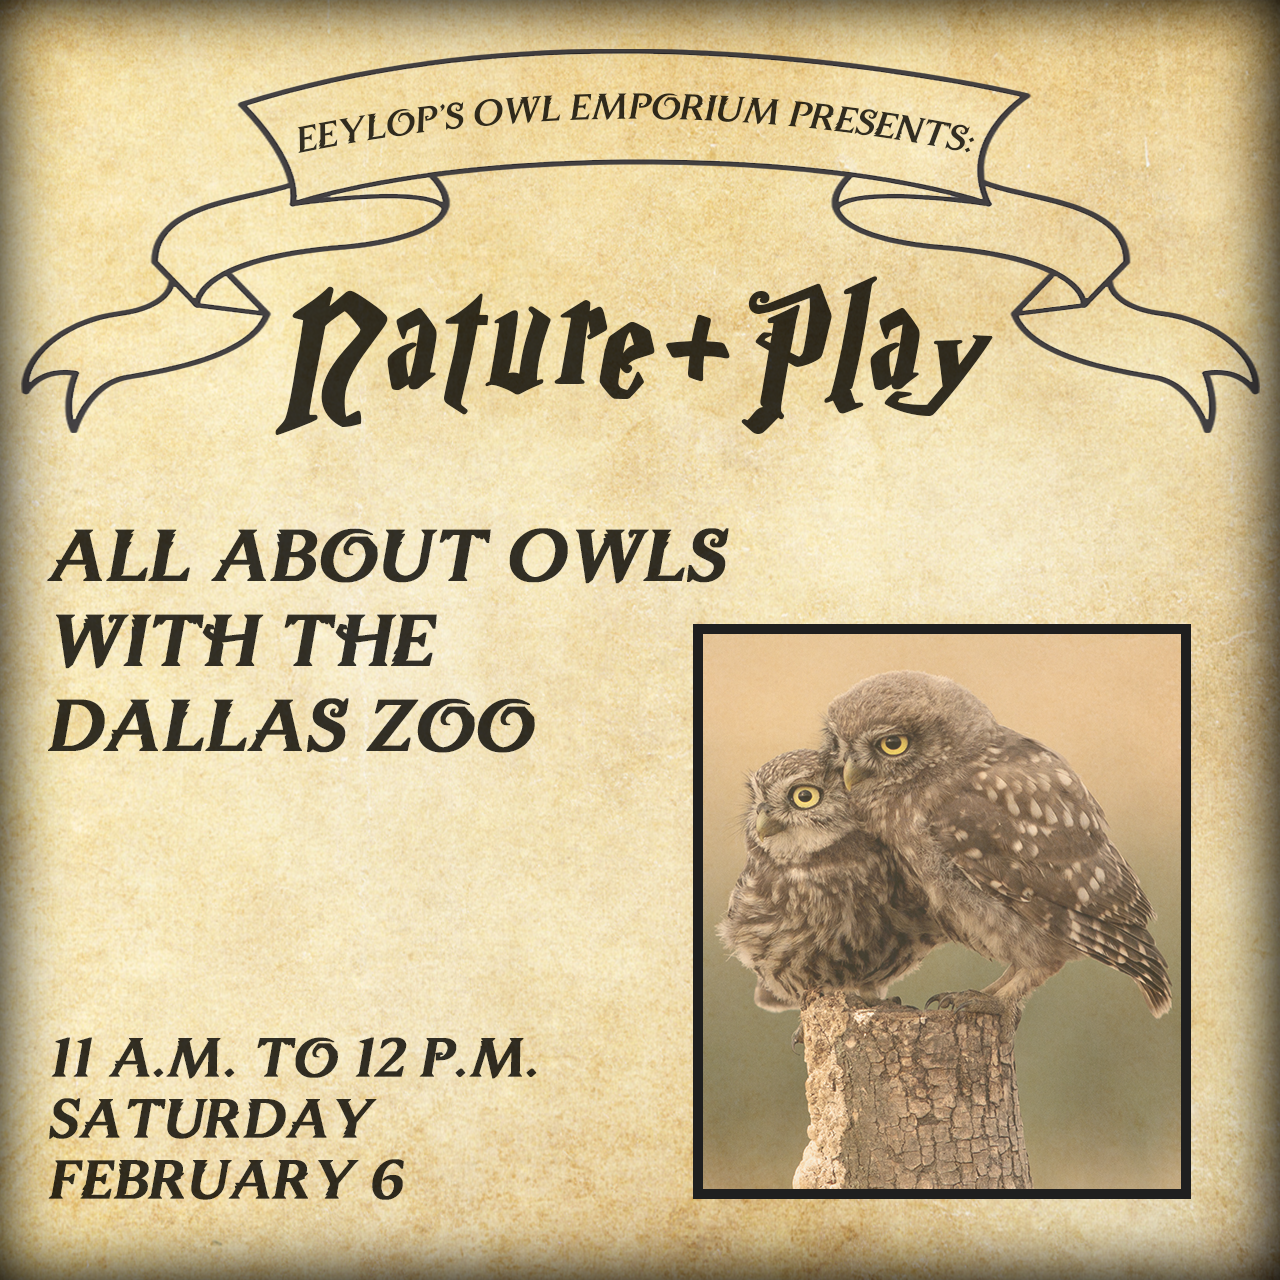 Nature + Play: All About Owls with the Dallas Zoo